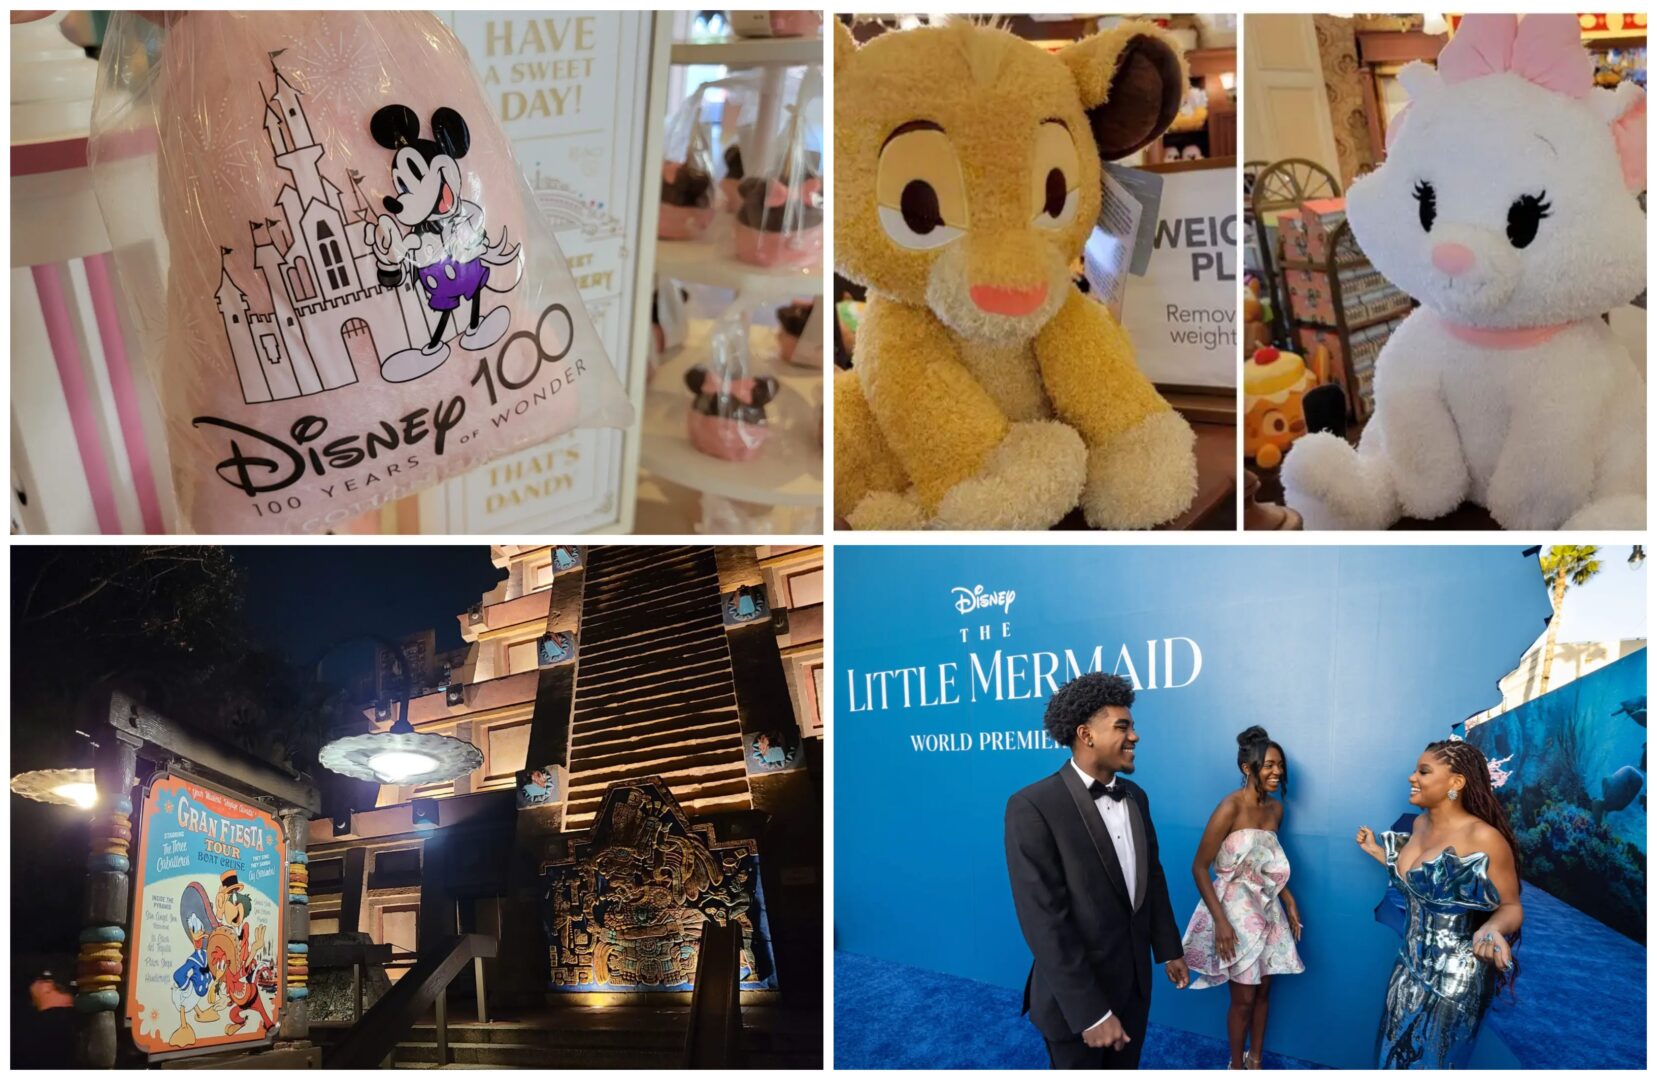 Disney News Highlights: Disney100 Cotton Candy and Mystery Pins, The Little Mermaid Premier, New Sushi Restaurant Opens This Summer in Epcot, More Weighted Plush Arrive at WDW